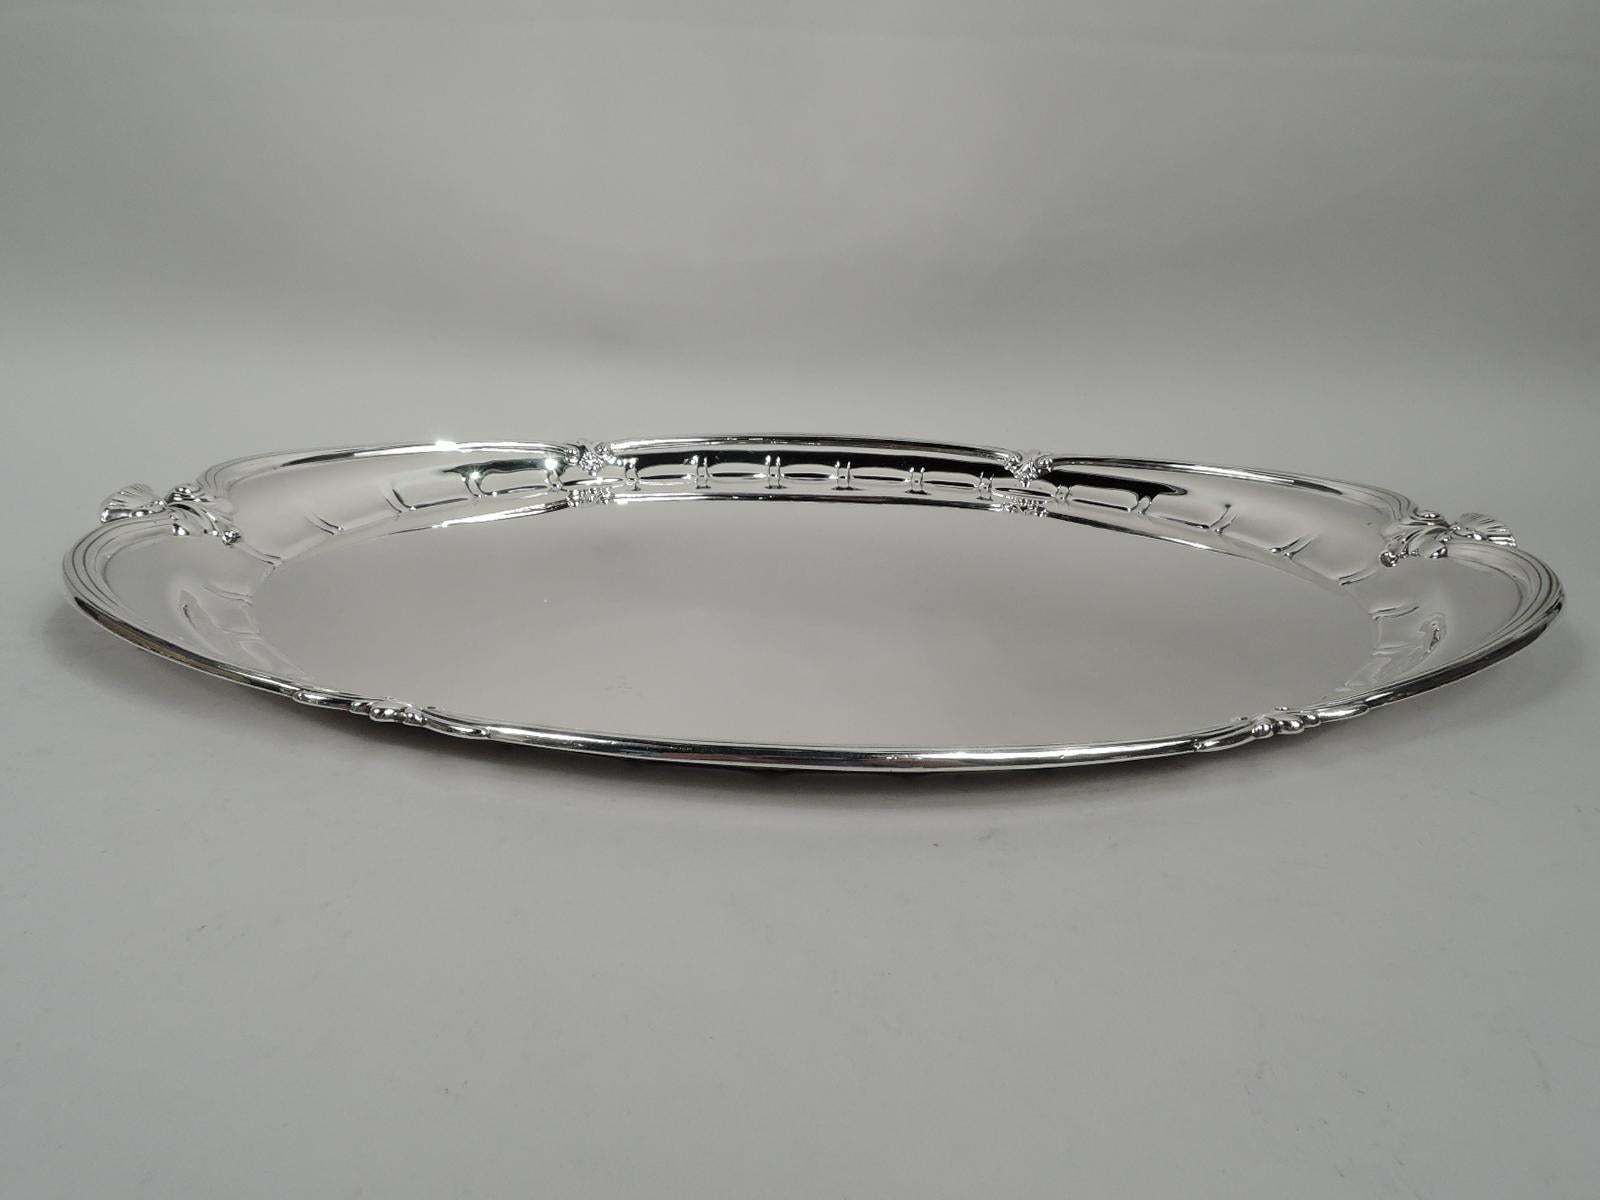 Elegant Edwardian classical sterling silver tray. Made by Tiffany & Co. in New York. Oval well with lobed and stylized border. Rim reeded, asymmetrical, and lobed inset with leaves, scrolls, and covered vases. Fully marked including maker’s stamp,